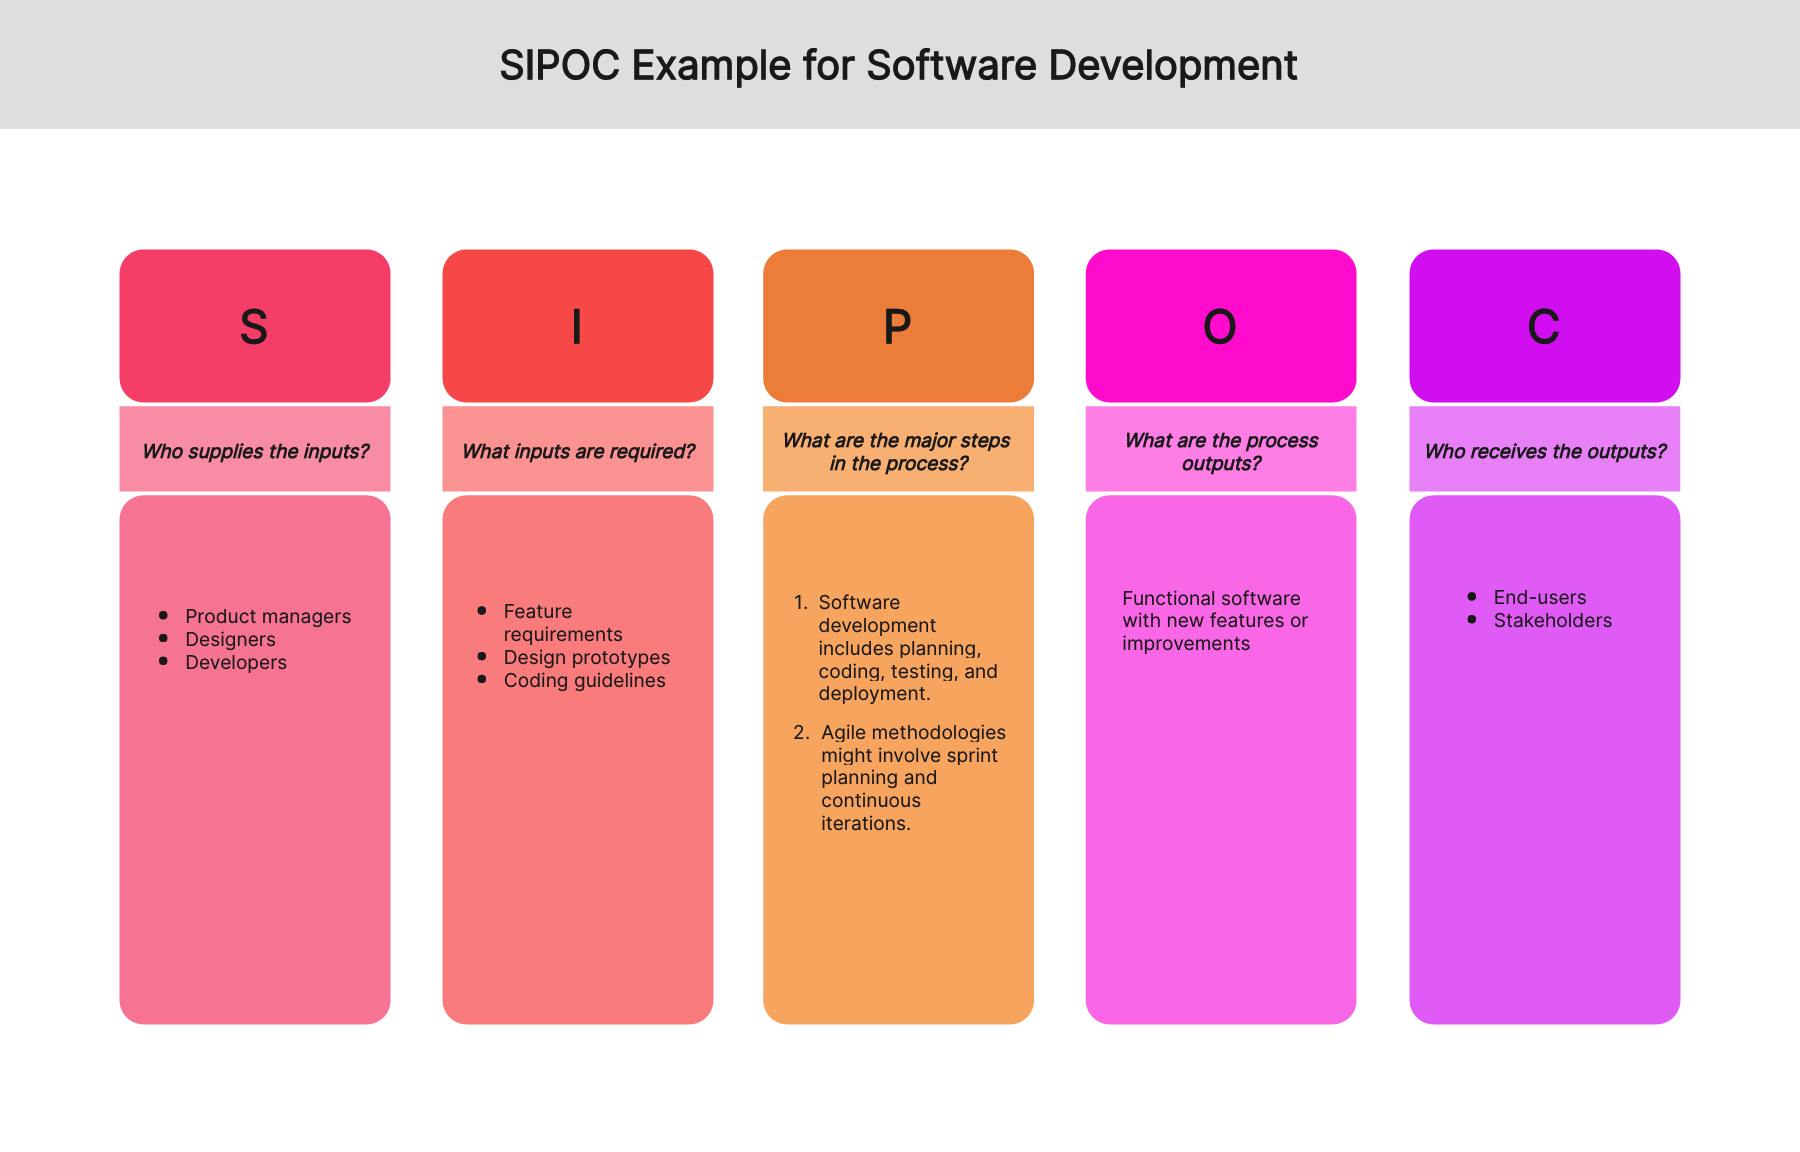 sipoc-examples-software-development-01